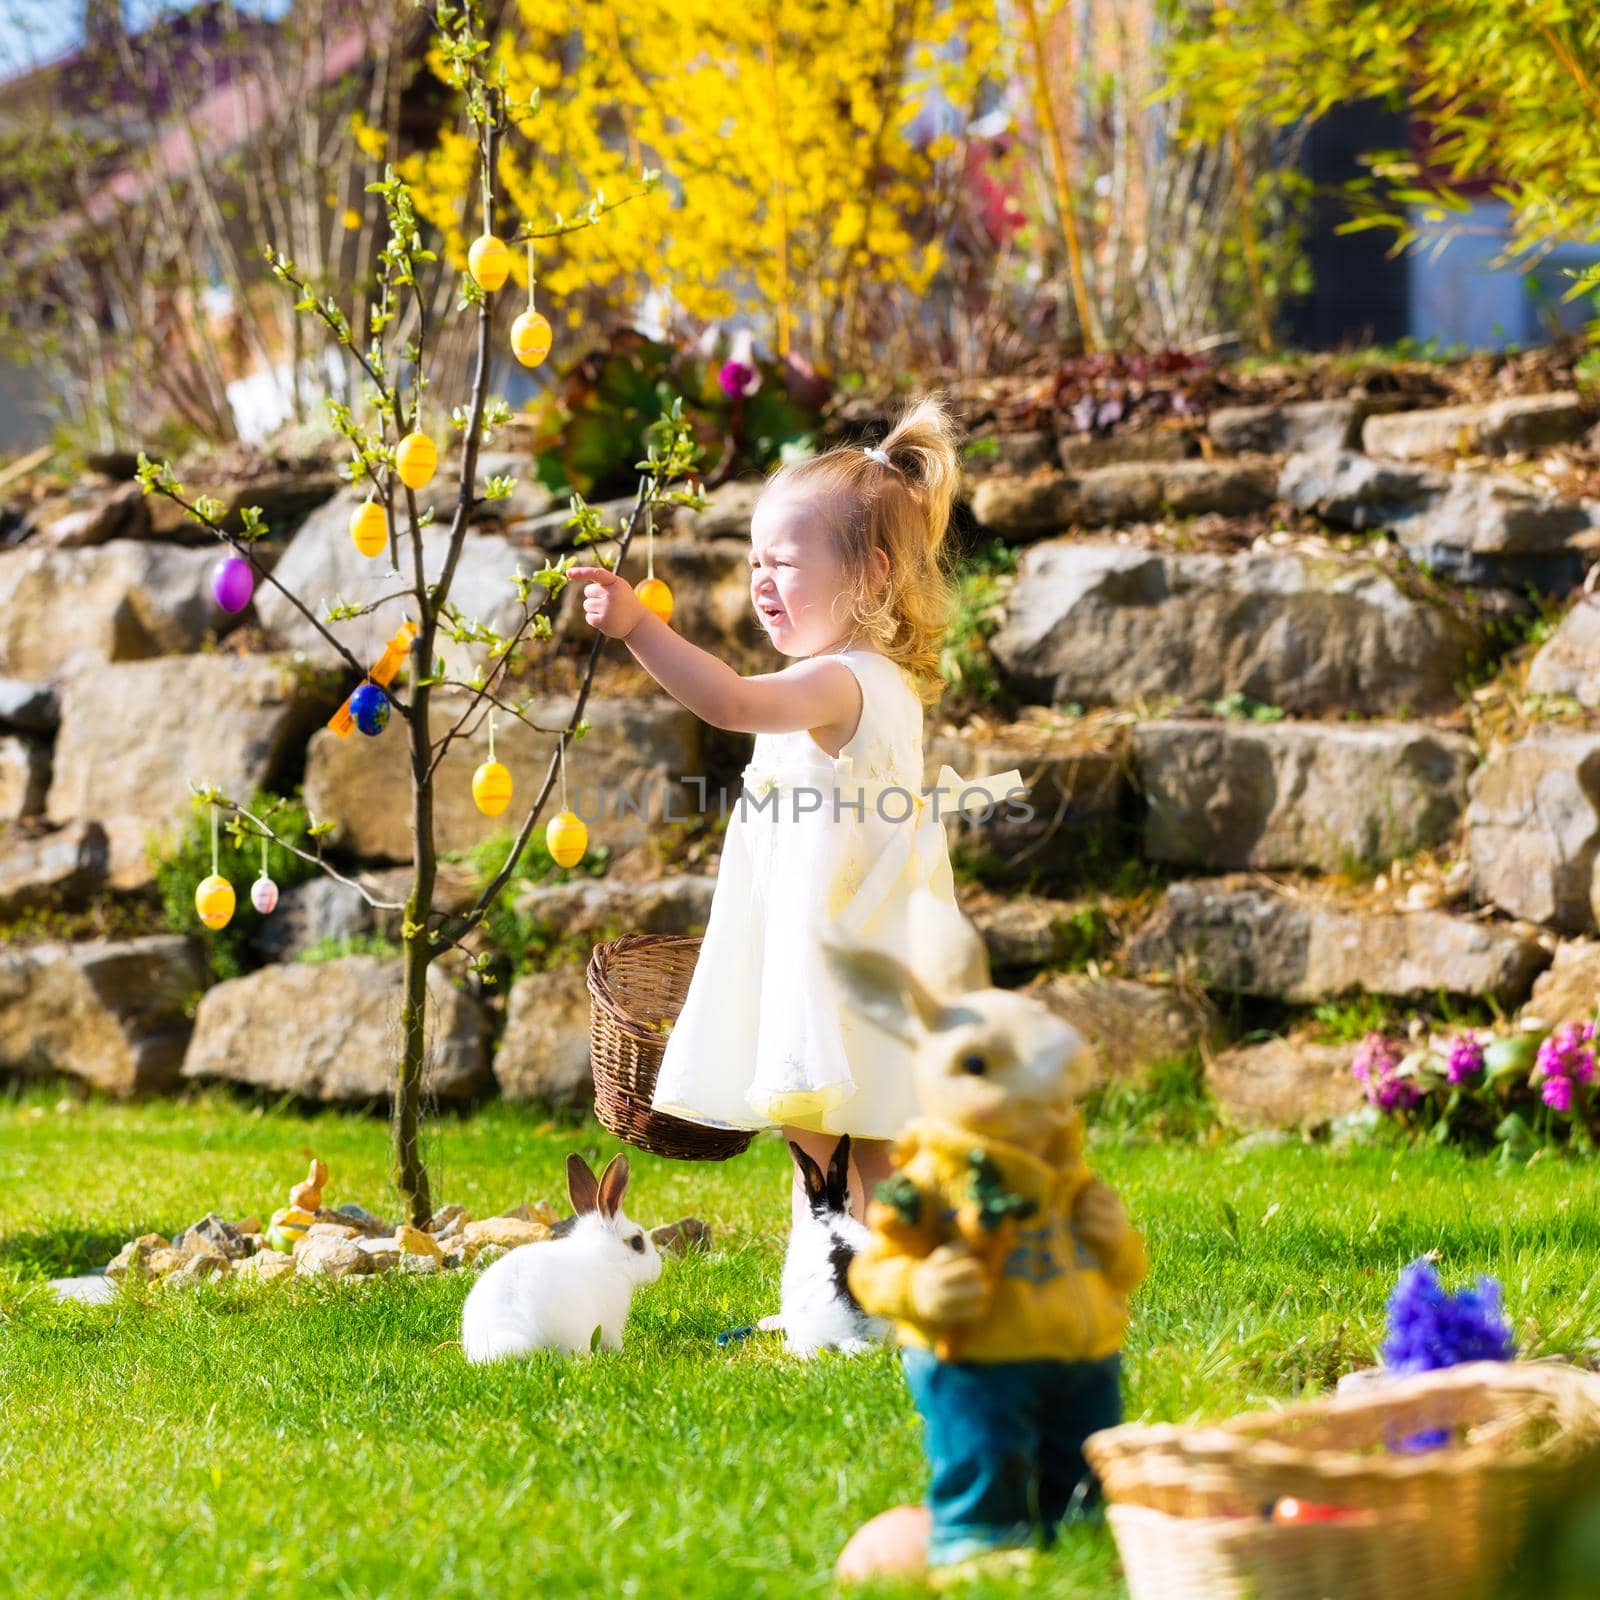 Little Girl on an Easter Egg hunt on a meadow in spring, she holding a basket or Easter basket